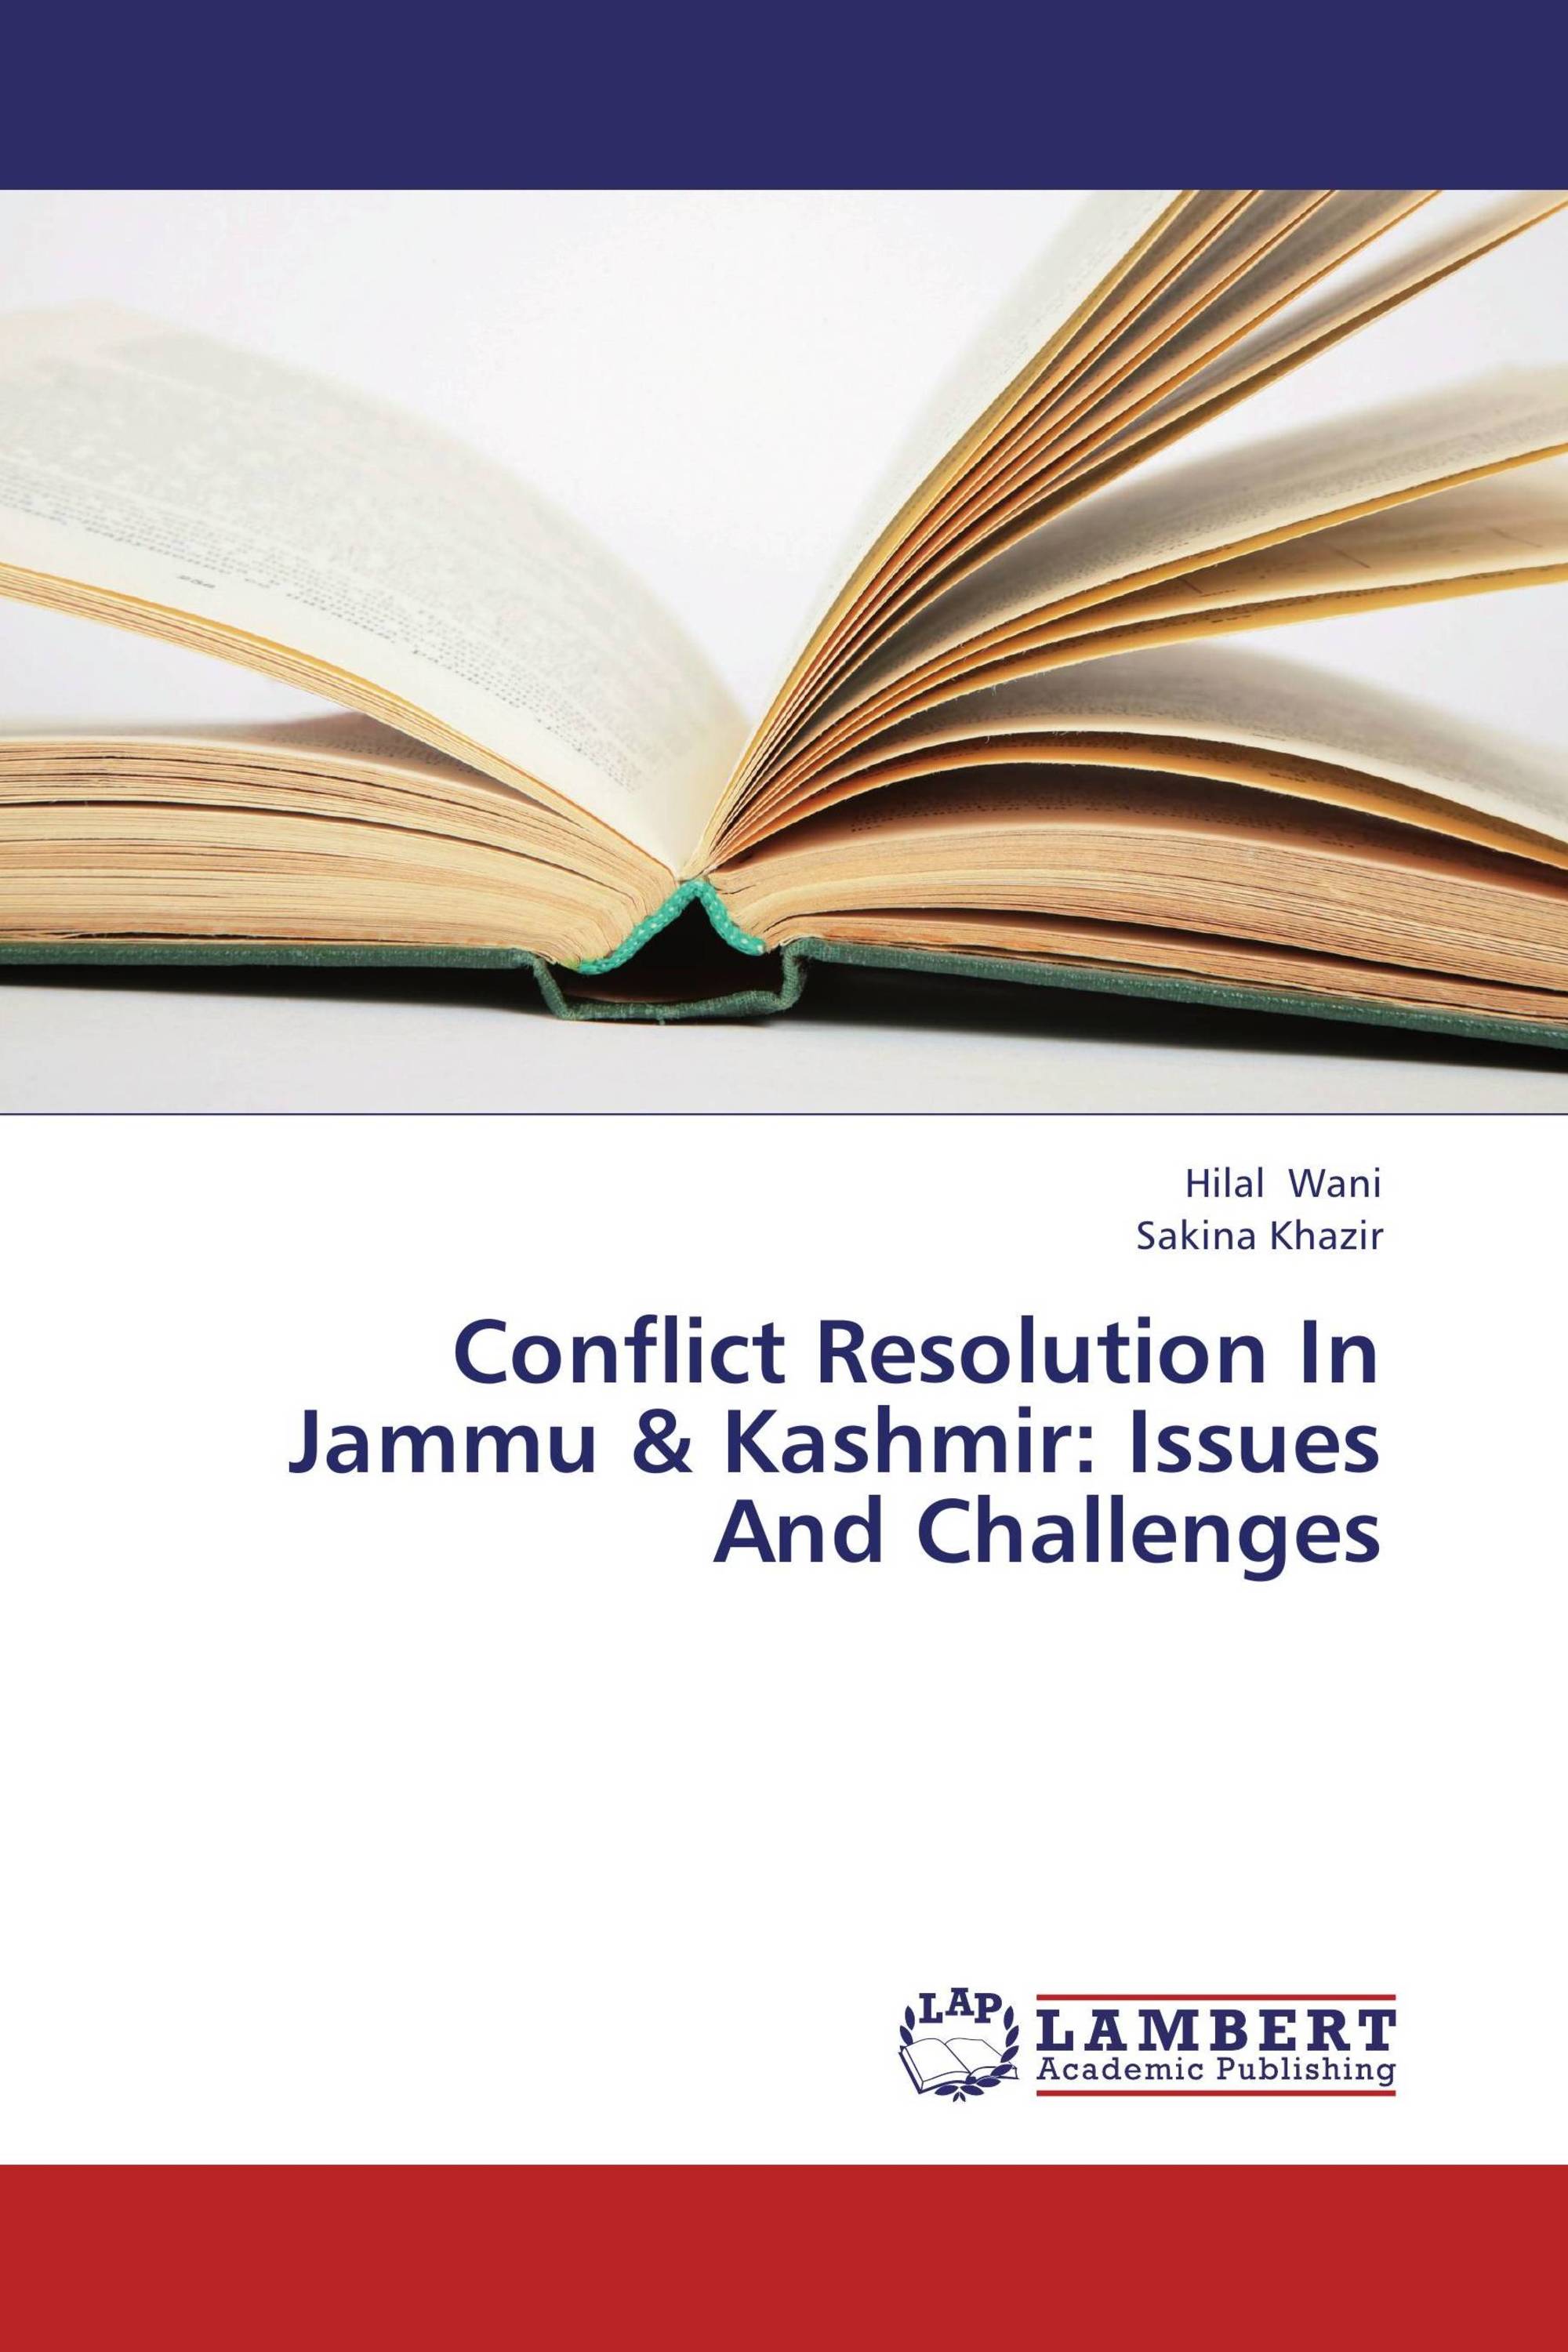 problem solving decision making model in kashmir conflict resolution prospects and challenges